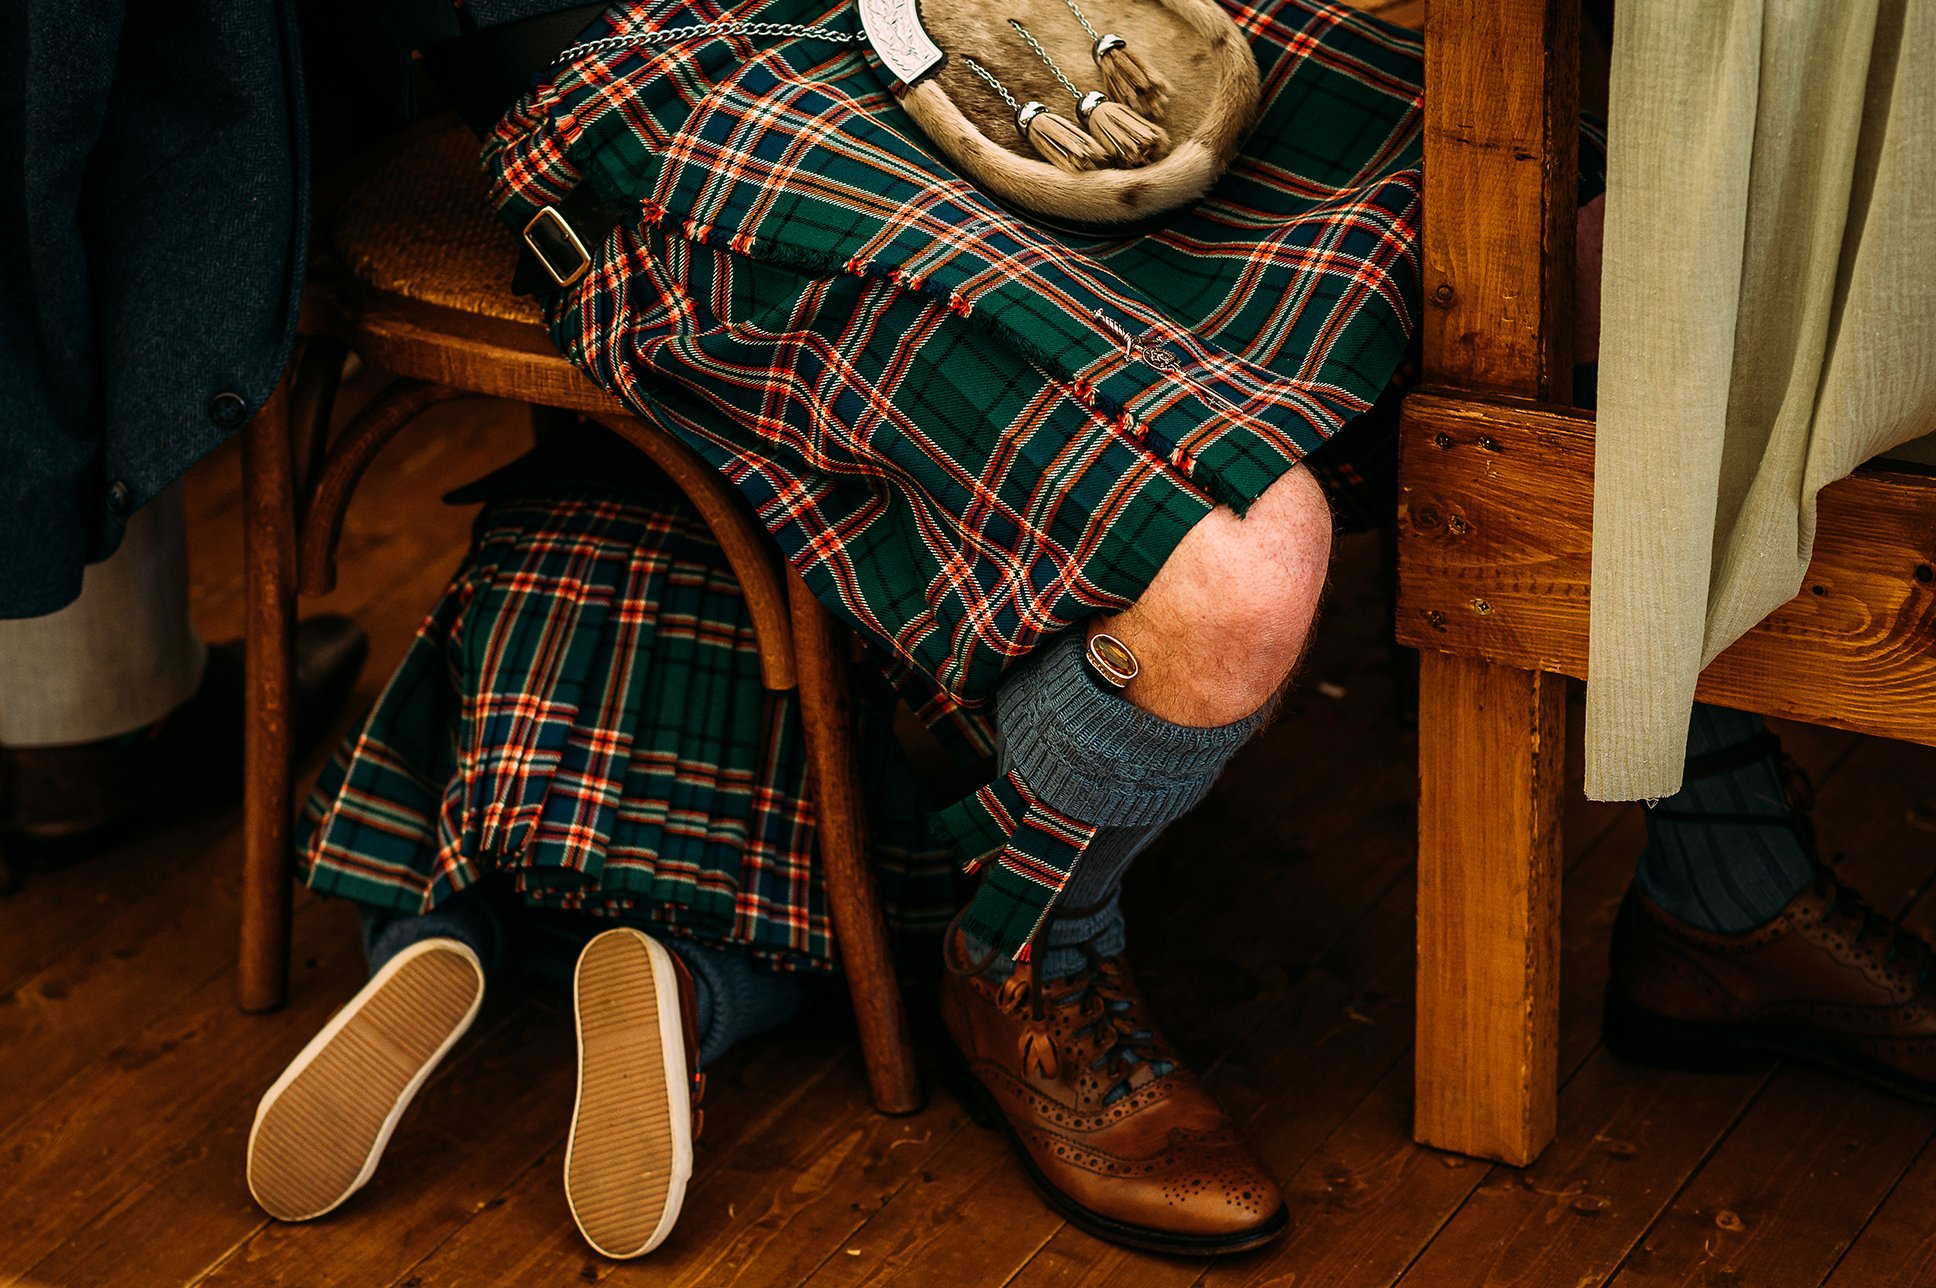  Close up of son hiding under dads chair. Both wearing matching kilts. 